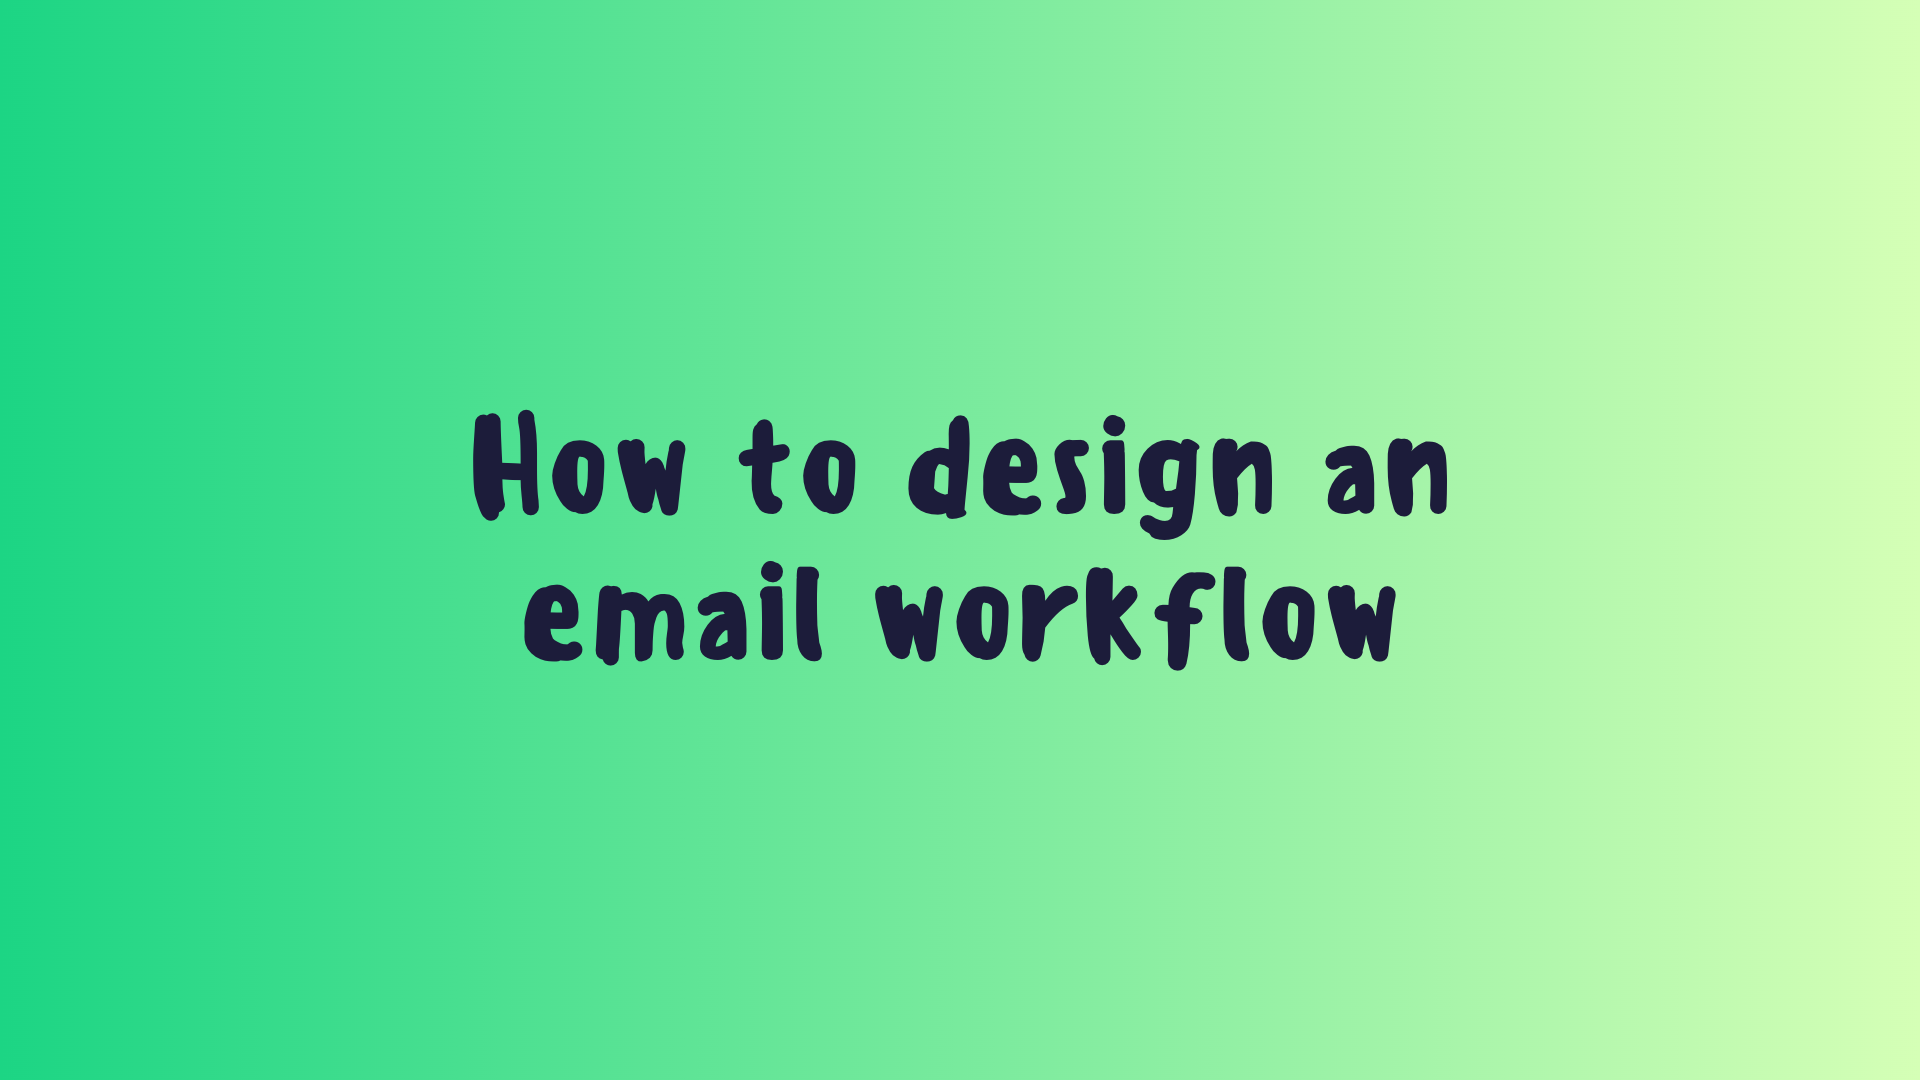 How to design an email workflow (blog)